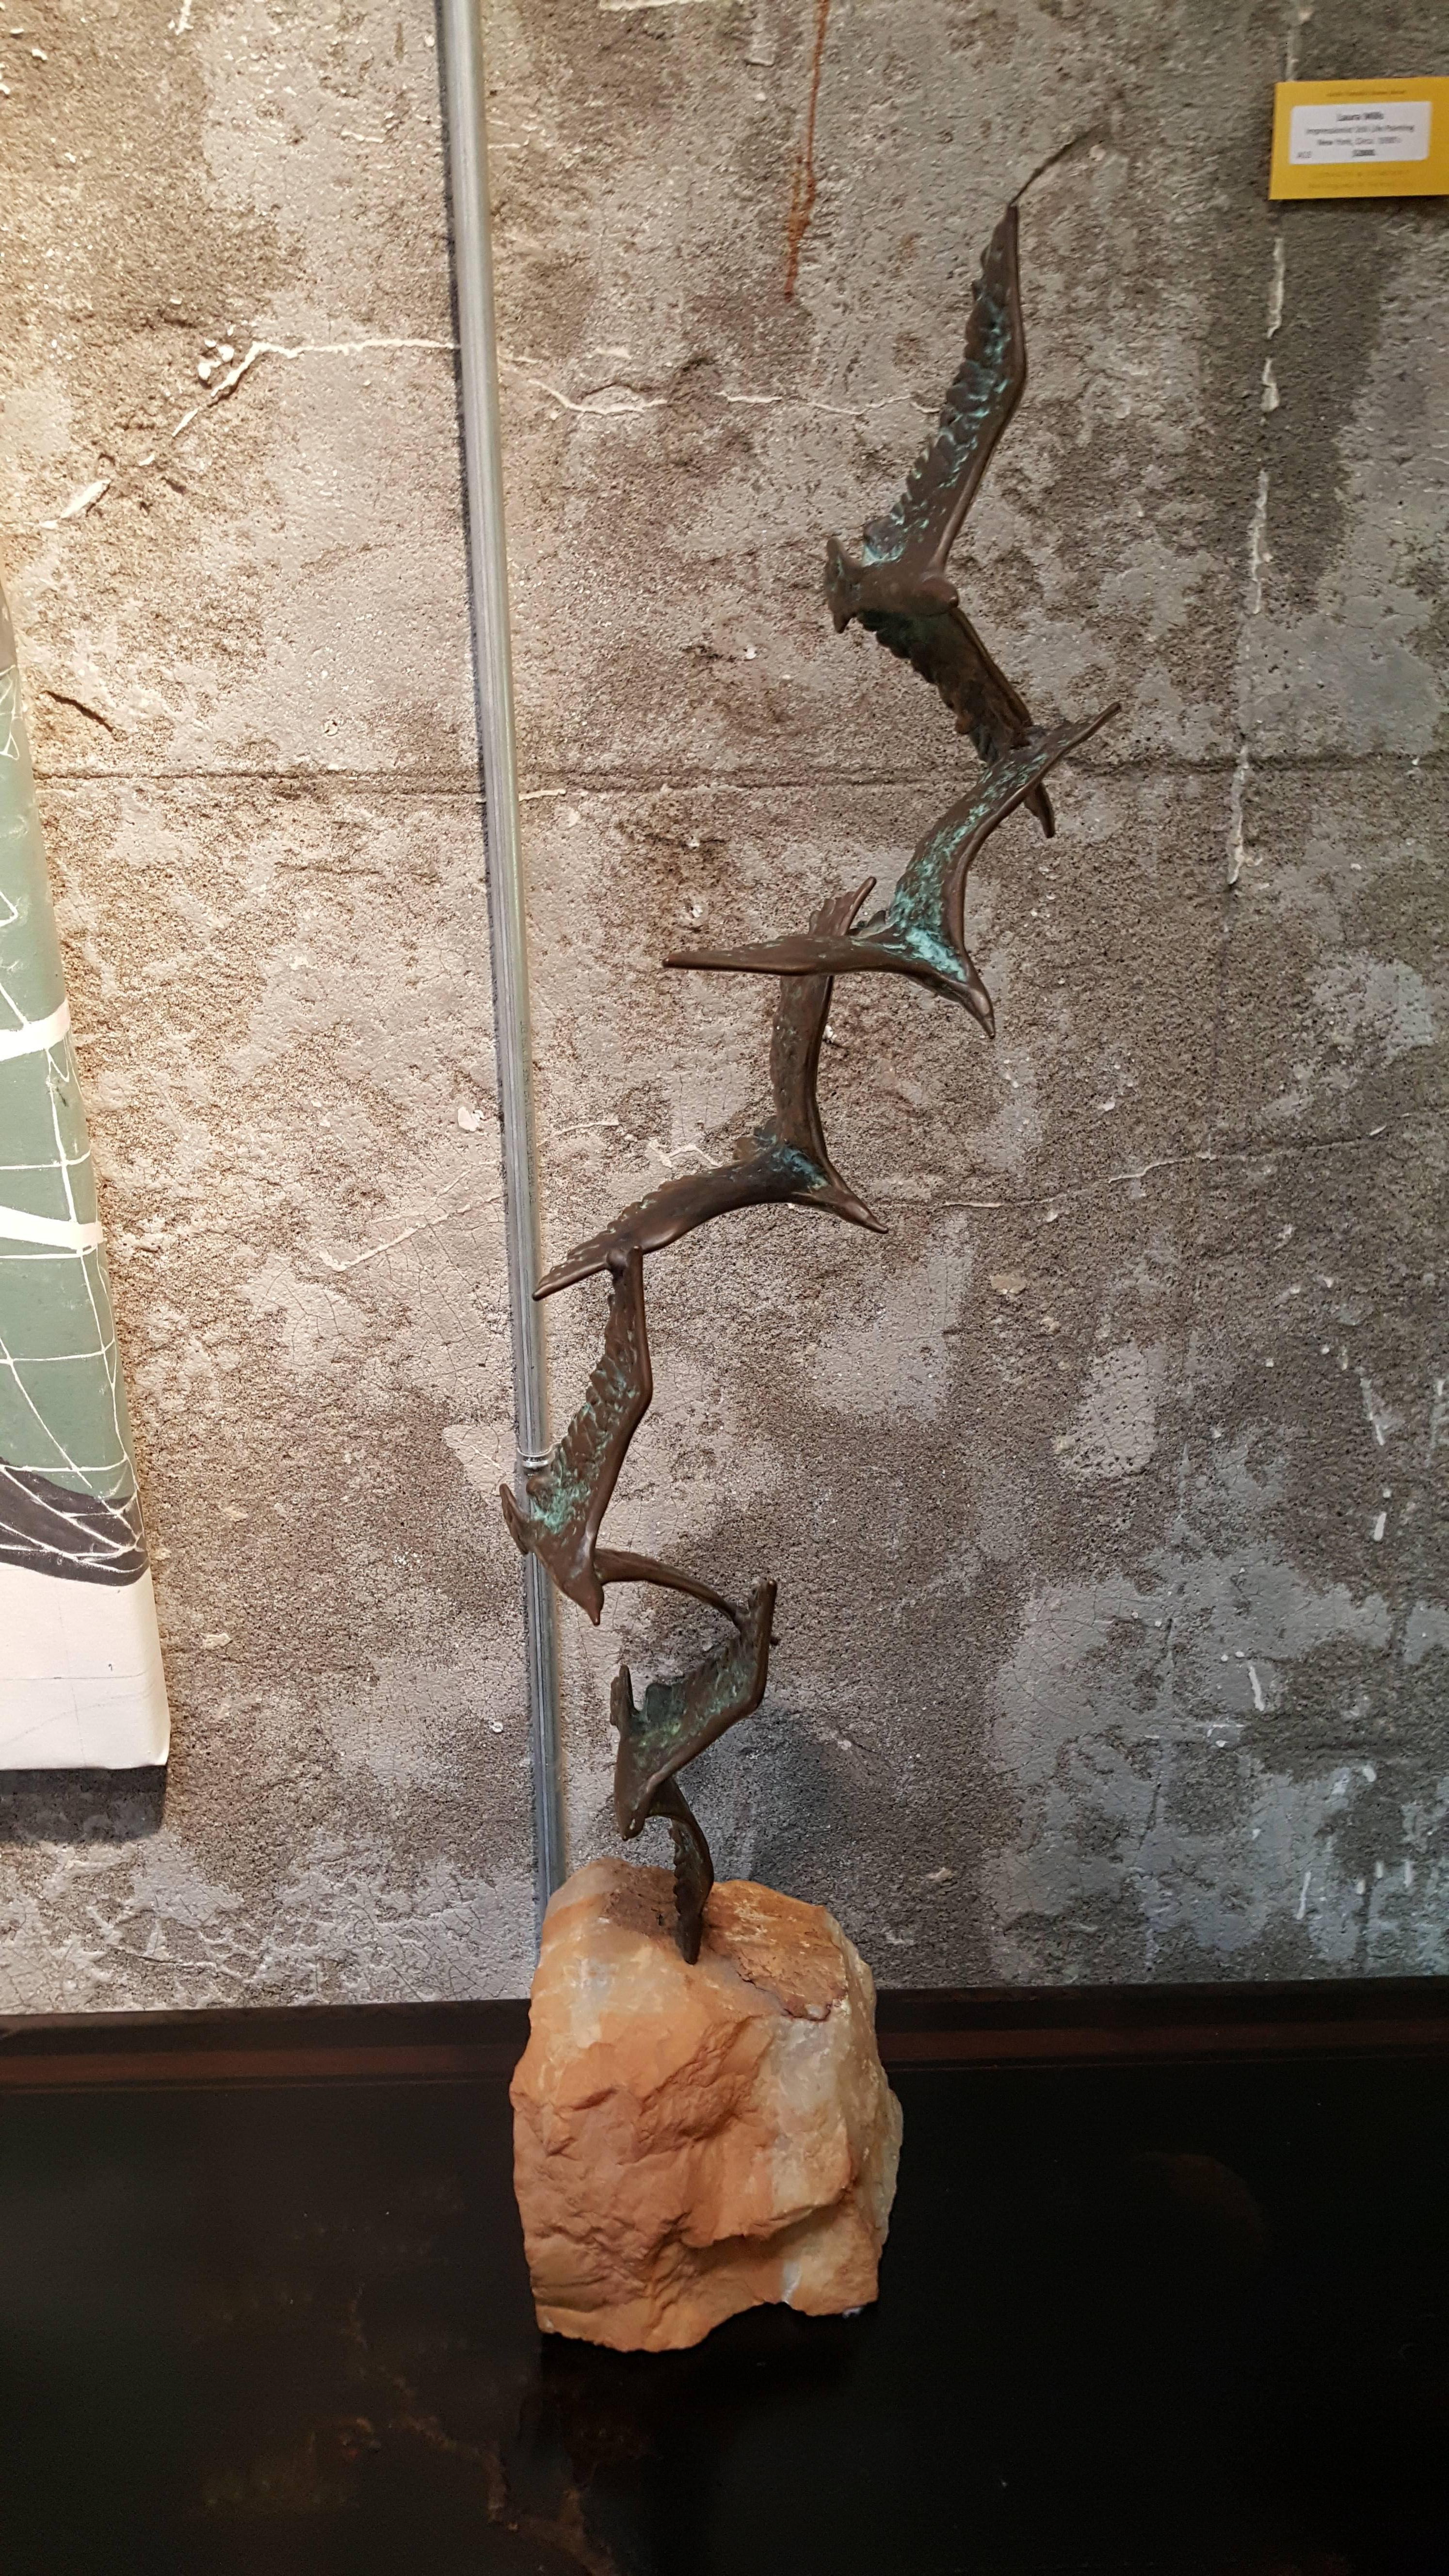 A bronze sculpture of birds in flight mounted to a quartz base. Signed C. Jere. 1972. Excellent condition with original patina. Measures 31.5" tall.